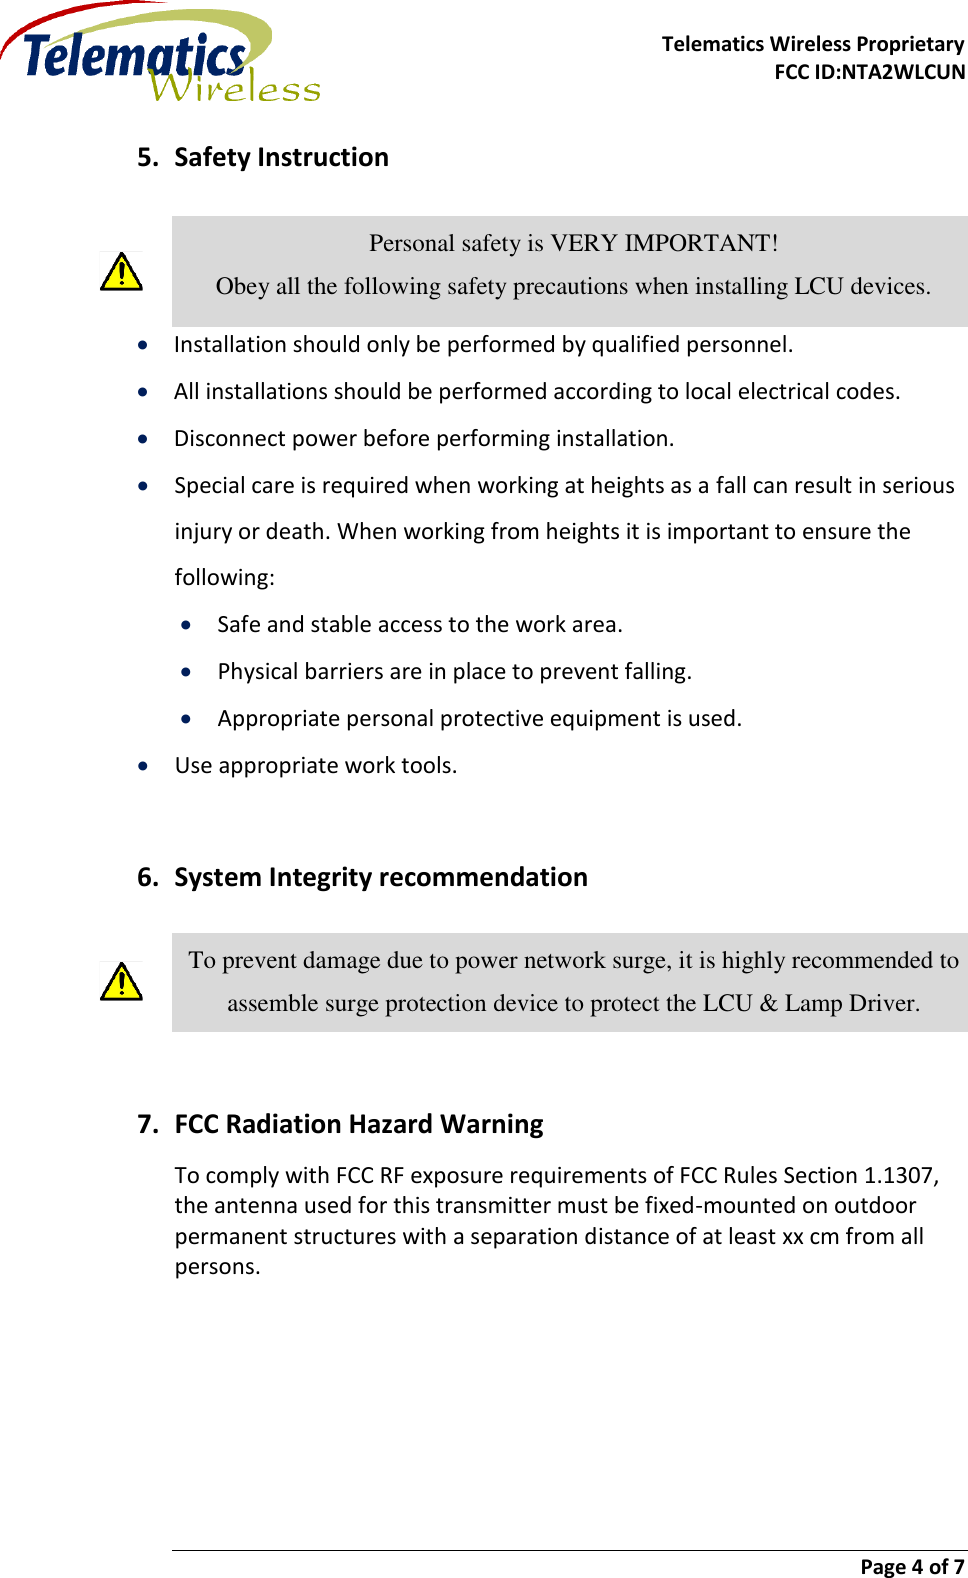     Telematics Wireless Proprietary FCC ID:NTA2WLCUN                        Page 4 of 7   5. Safety Instruction   Personal safety is VERY IMPORTANT! Obey all the following safety precautions when installing LCU devices.  Installation should only be performed by qualified personnel.  All installations should be performed according to local electrical codes.  Disconnect power before performing installation.  Special care is required when working at heights as a fall can result in serious injury or death. When working from heights it is important to ensure the following:  Safe and stable access to the work area.  Physical barriers are in place to prevent falling.  Appropriate personal protective equipment is used.  Use appropriate work tools.  6. System Integrity recommendation  To prevent damage due to power network surge, it is highly recommended to assemble surge protection device to protect the LCU &amp; Lamp Driver.  7. FCC Radiation Hazard Warning To comply with FCC RF exposure requirements of FCC Rules Section 1.1307, the antenna used for this transmitter must be fixed-mounted on outdoor permanent structures with a separation distance of at least xx cm from all persons.   